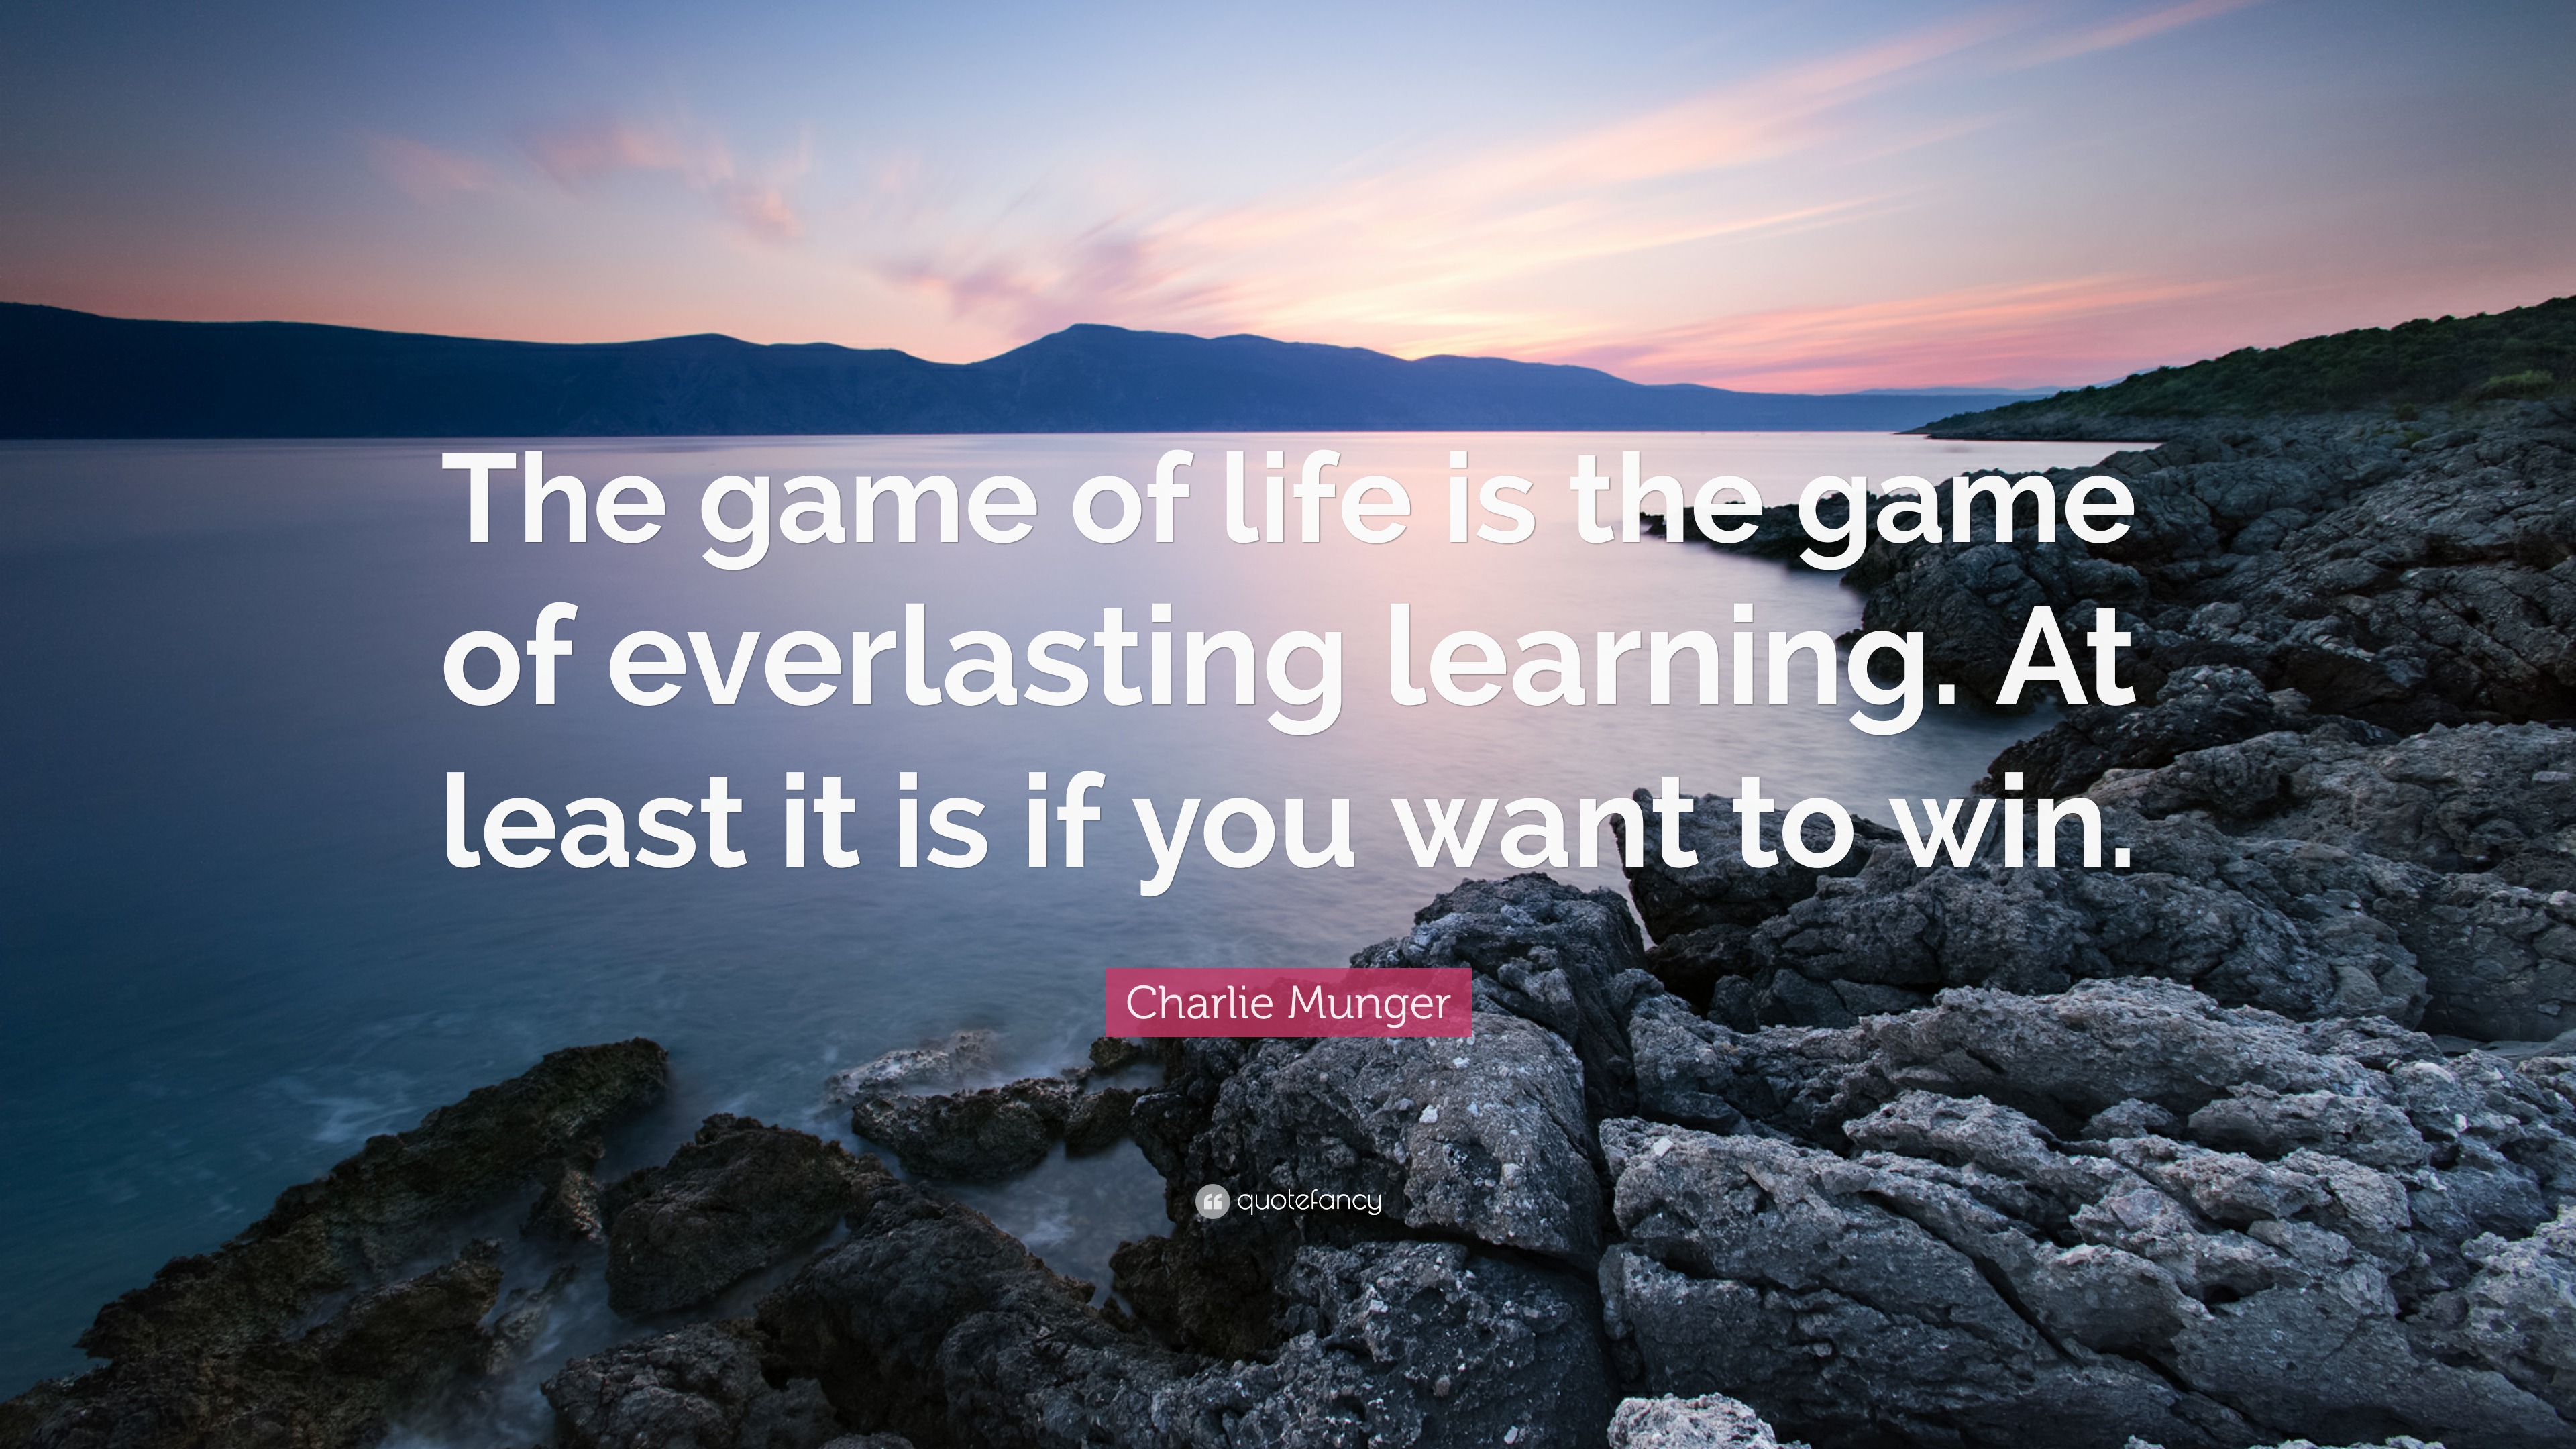 Use the Game of Life to Teach Motivation